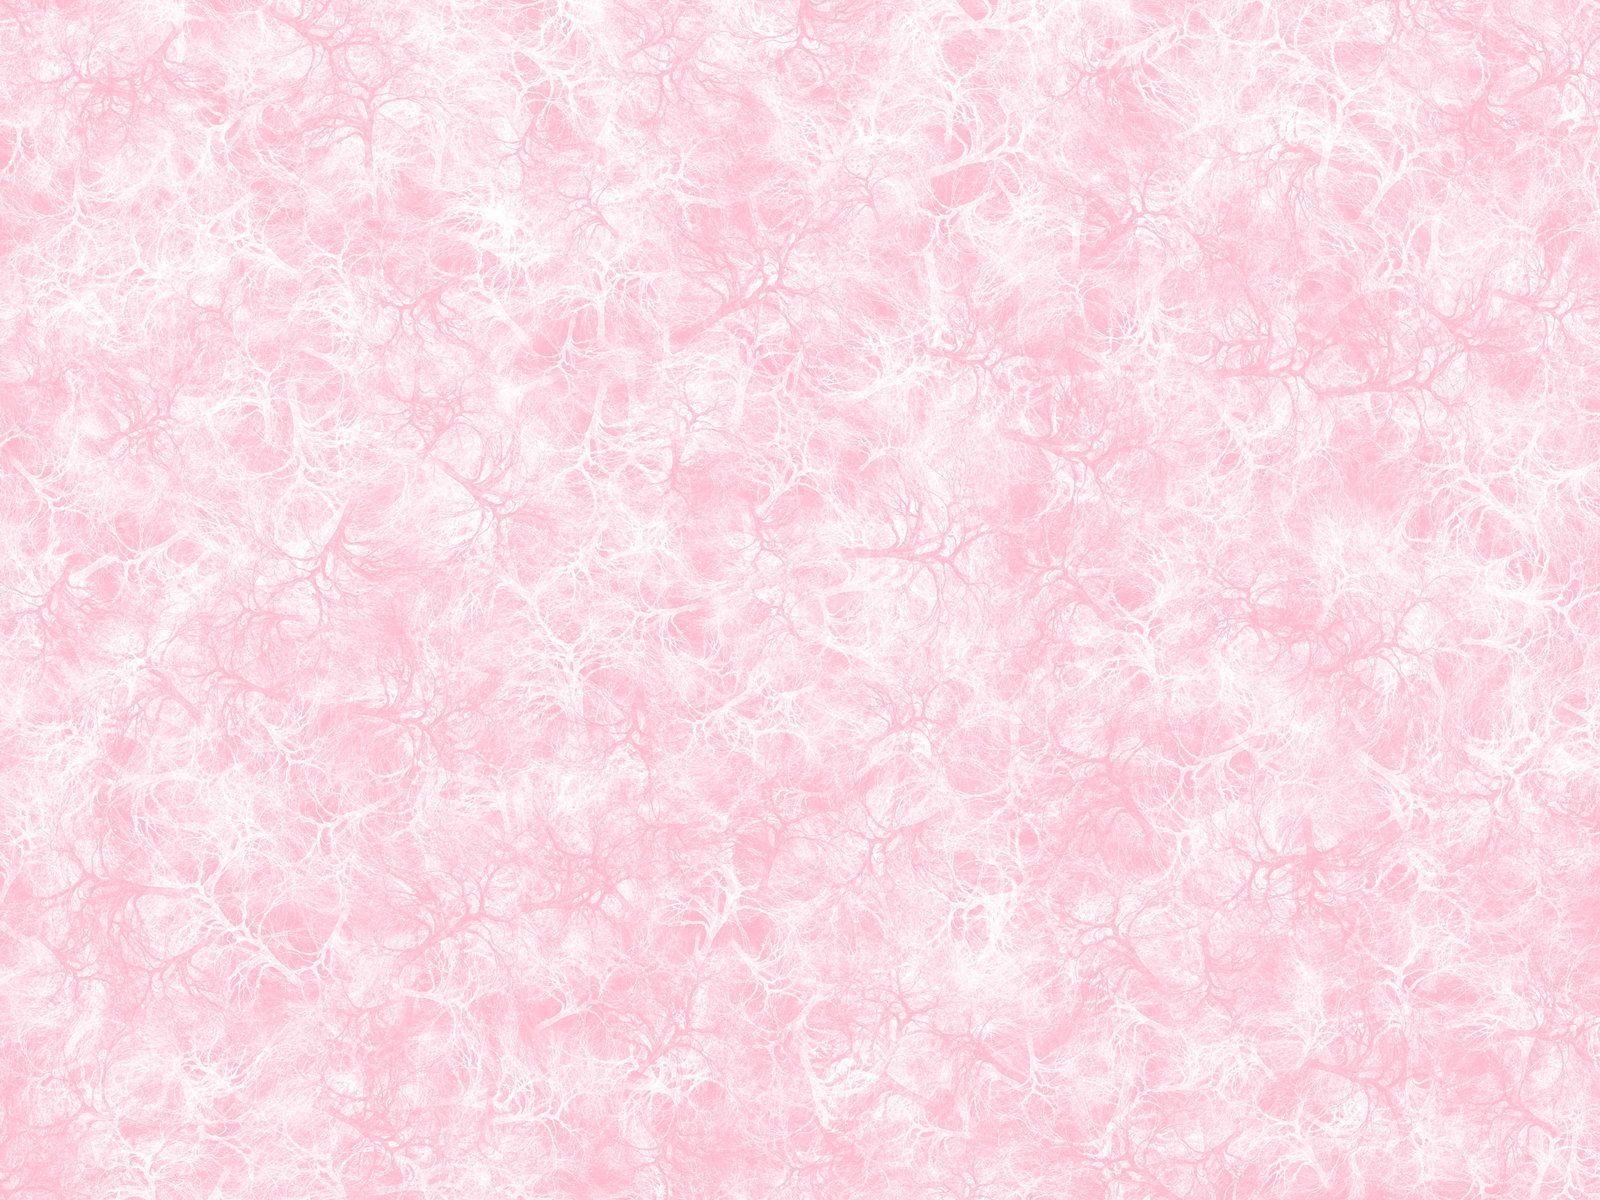 Soft Pink Devious Background by DonnaMarie113. イラスト・画像